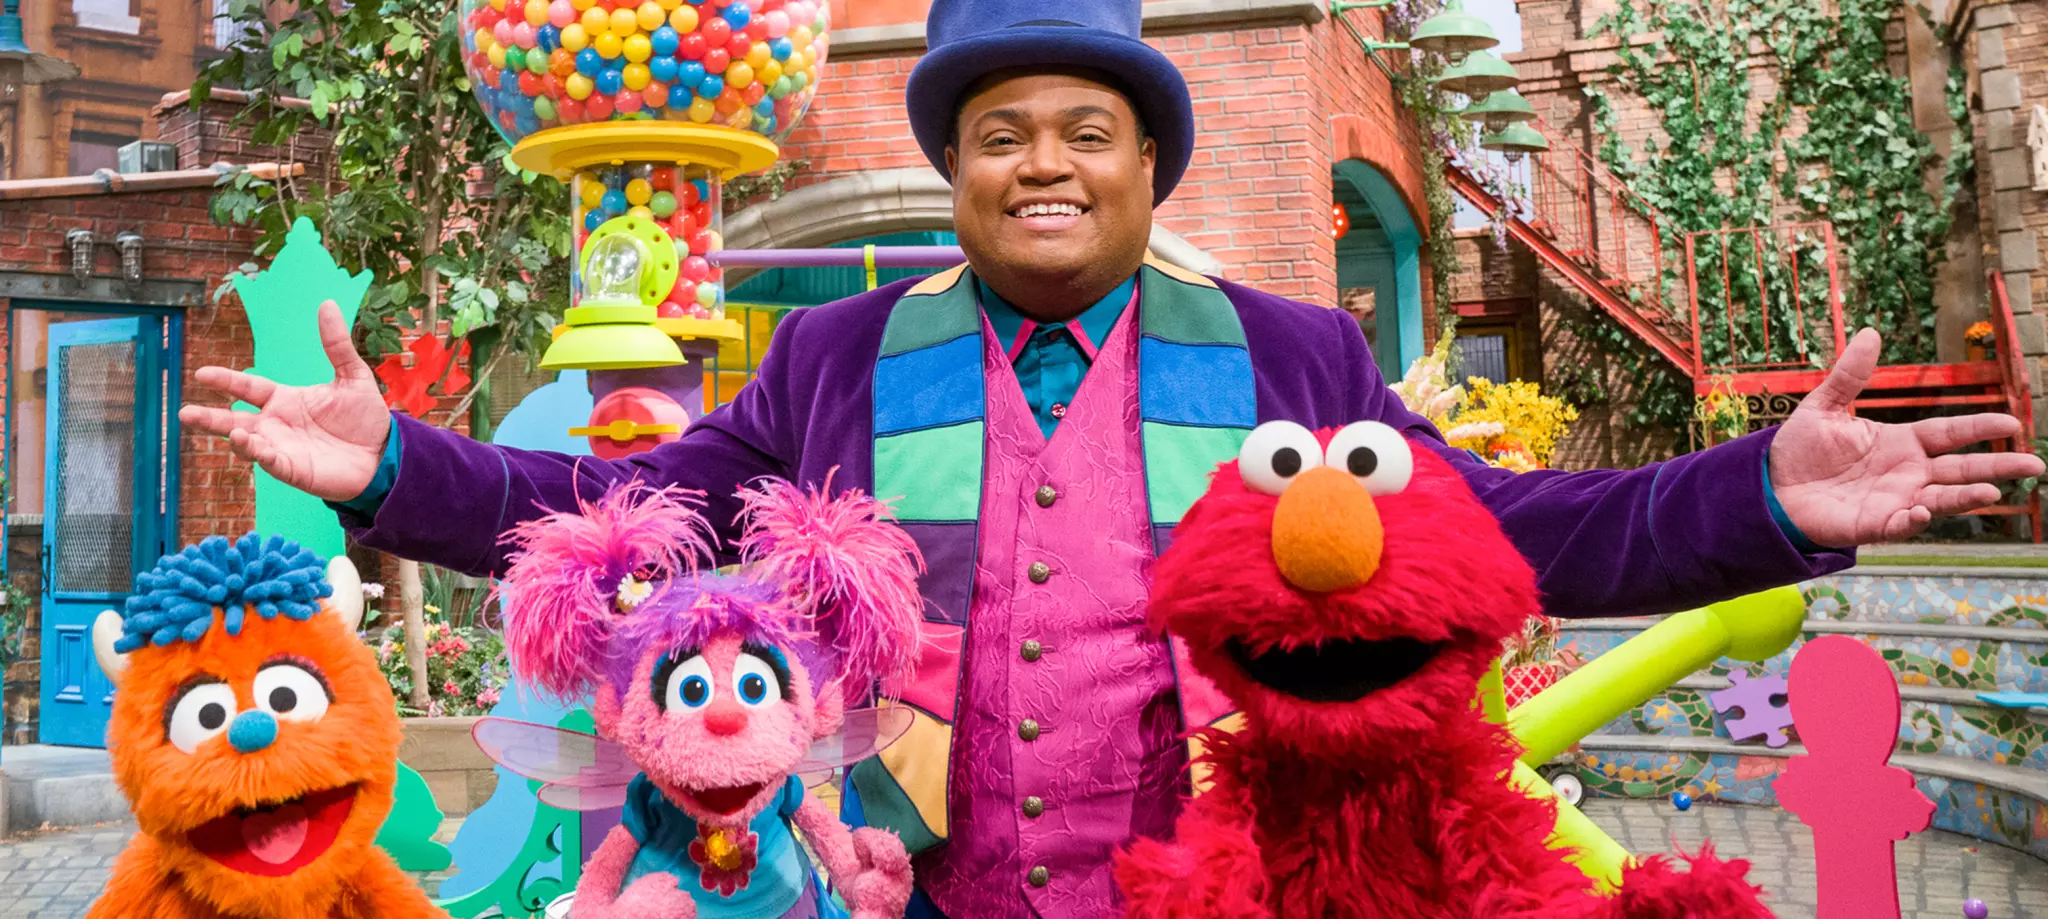 Chris, dressed as a ringleader, poses with Rudy, Abby, and Elmo